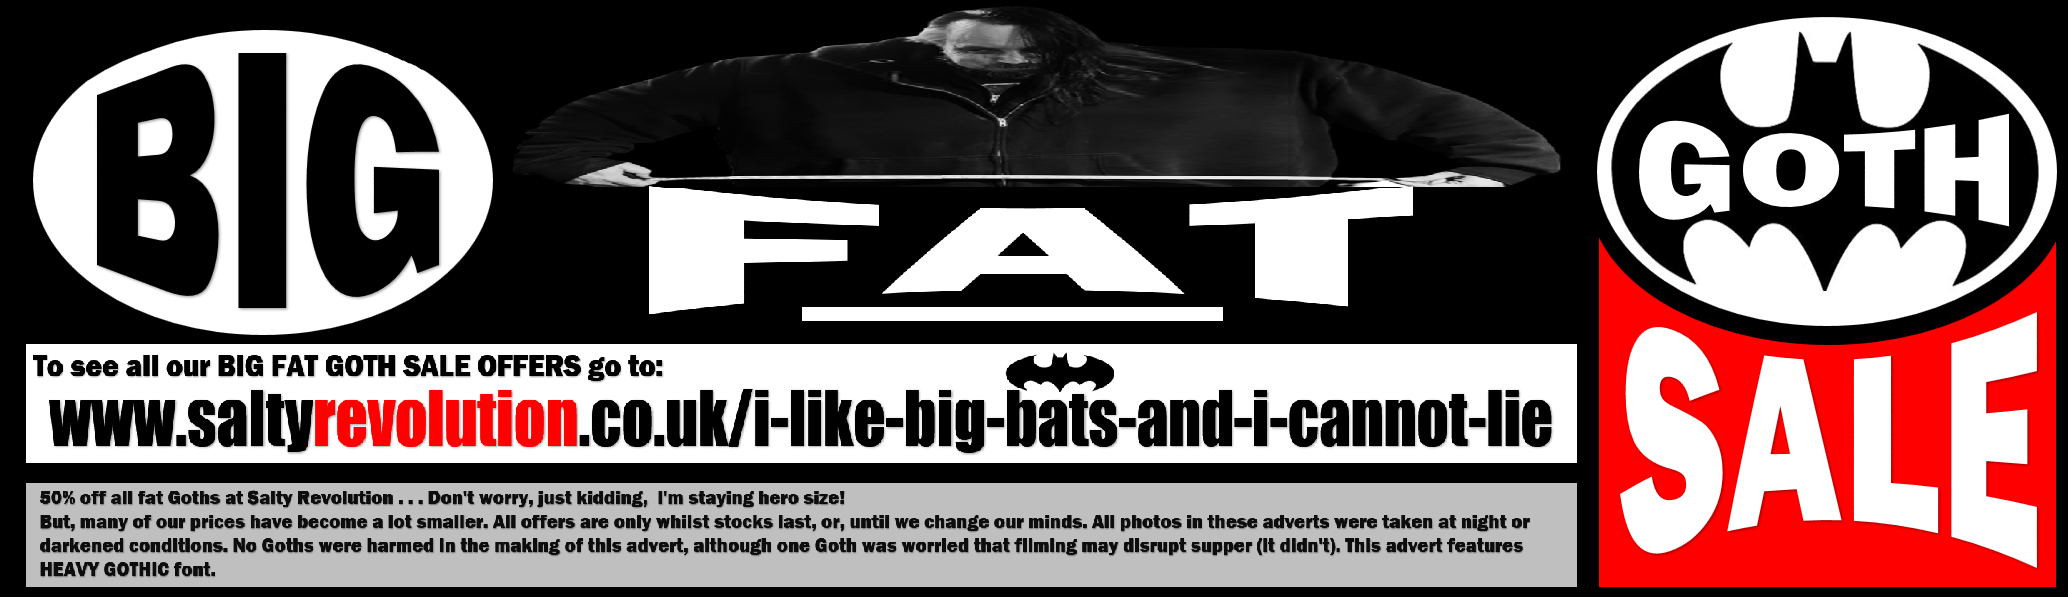 #Advert Big Fat Goth Sale Banner chunky.png